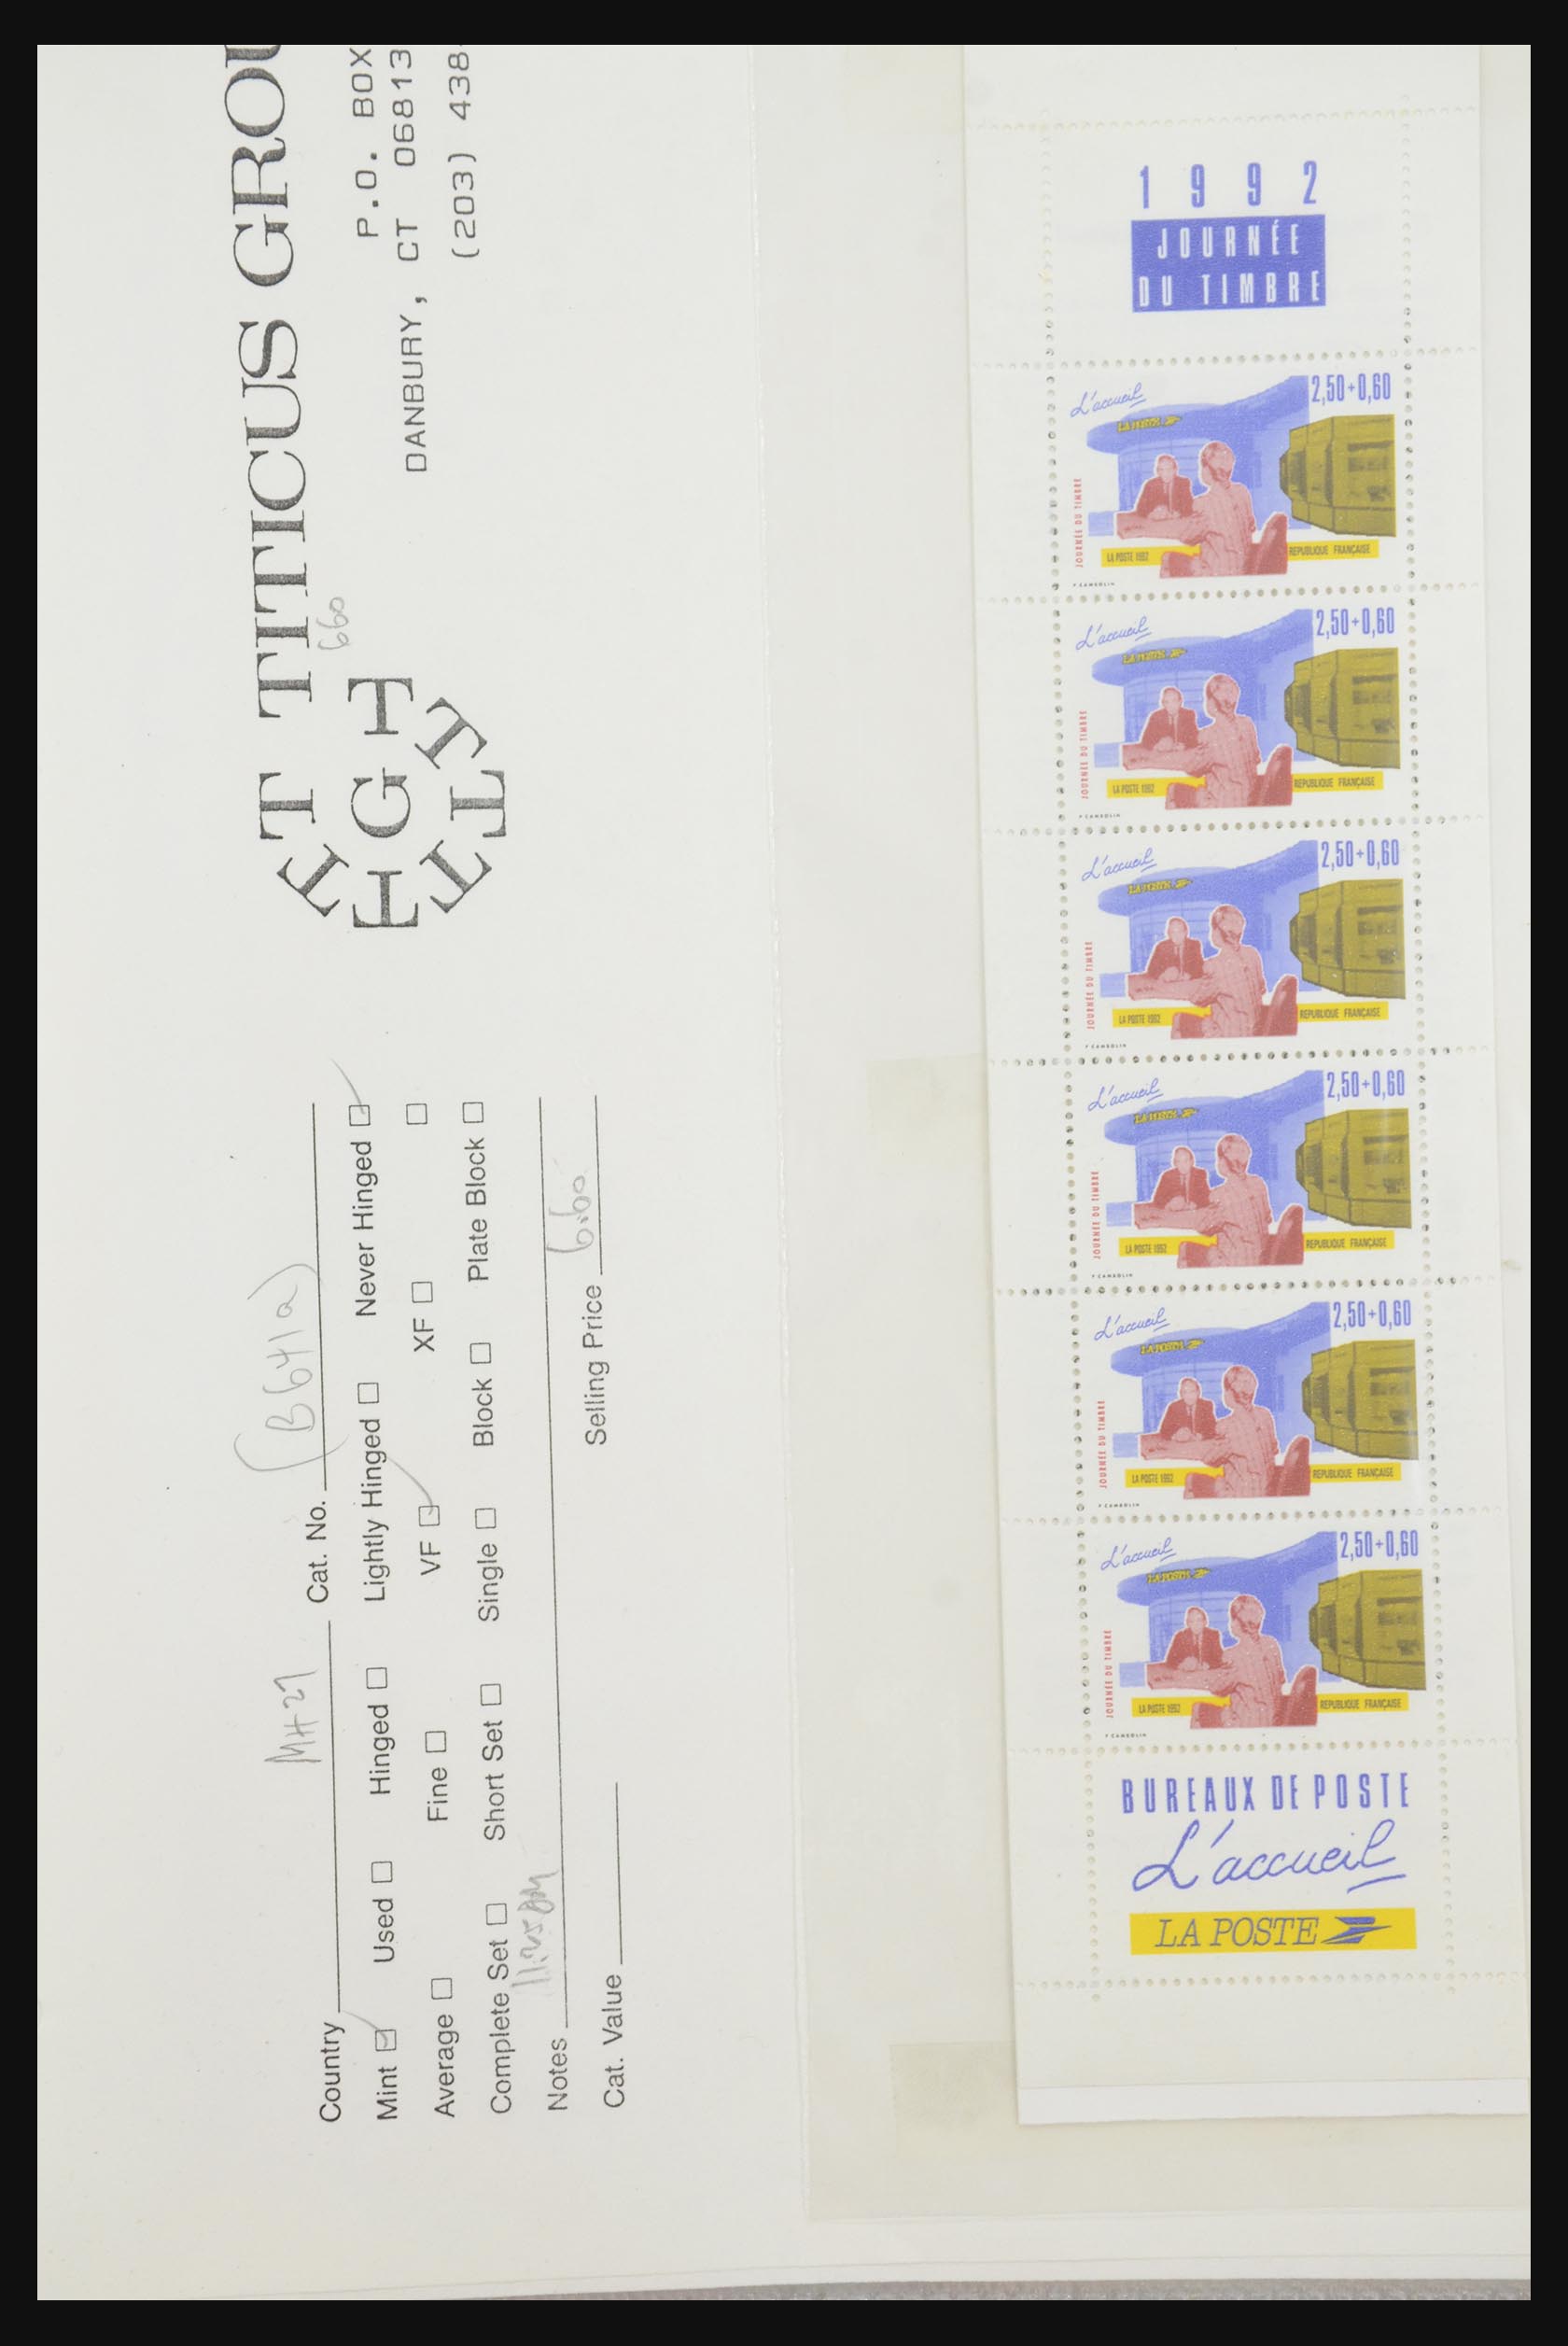 31915 050 - 31915 Western Europe souvenir sheets and stamp booklets on FDC.